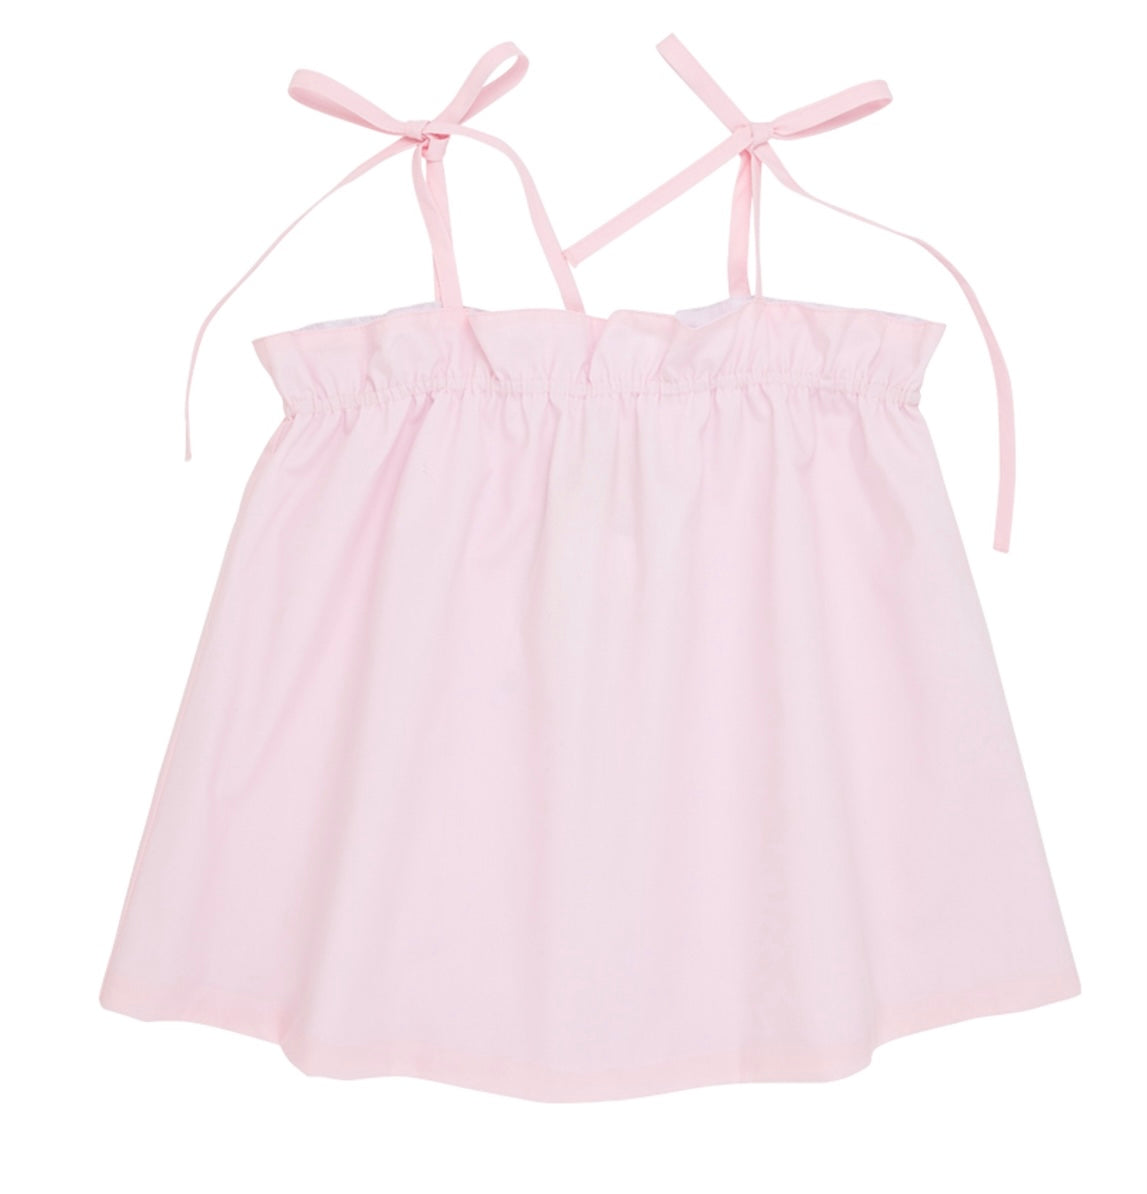 Lainey's Little Top - Palm Beach Pink